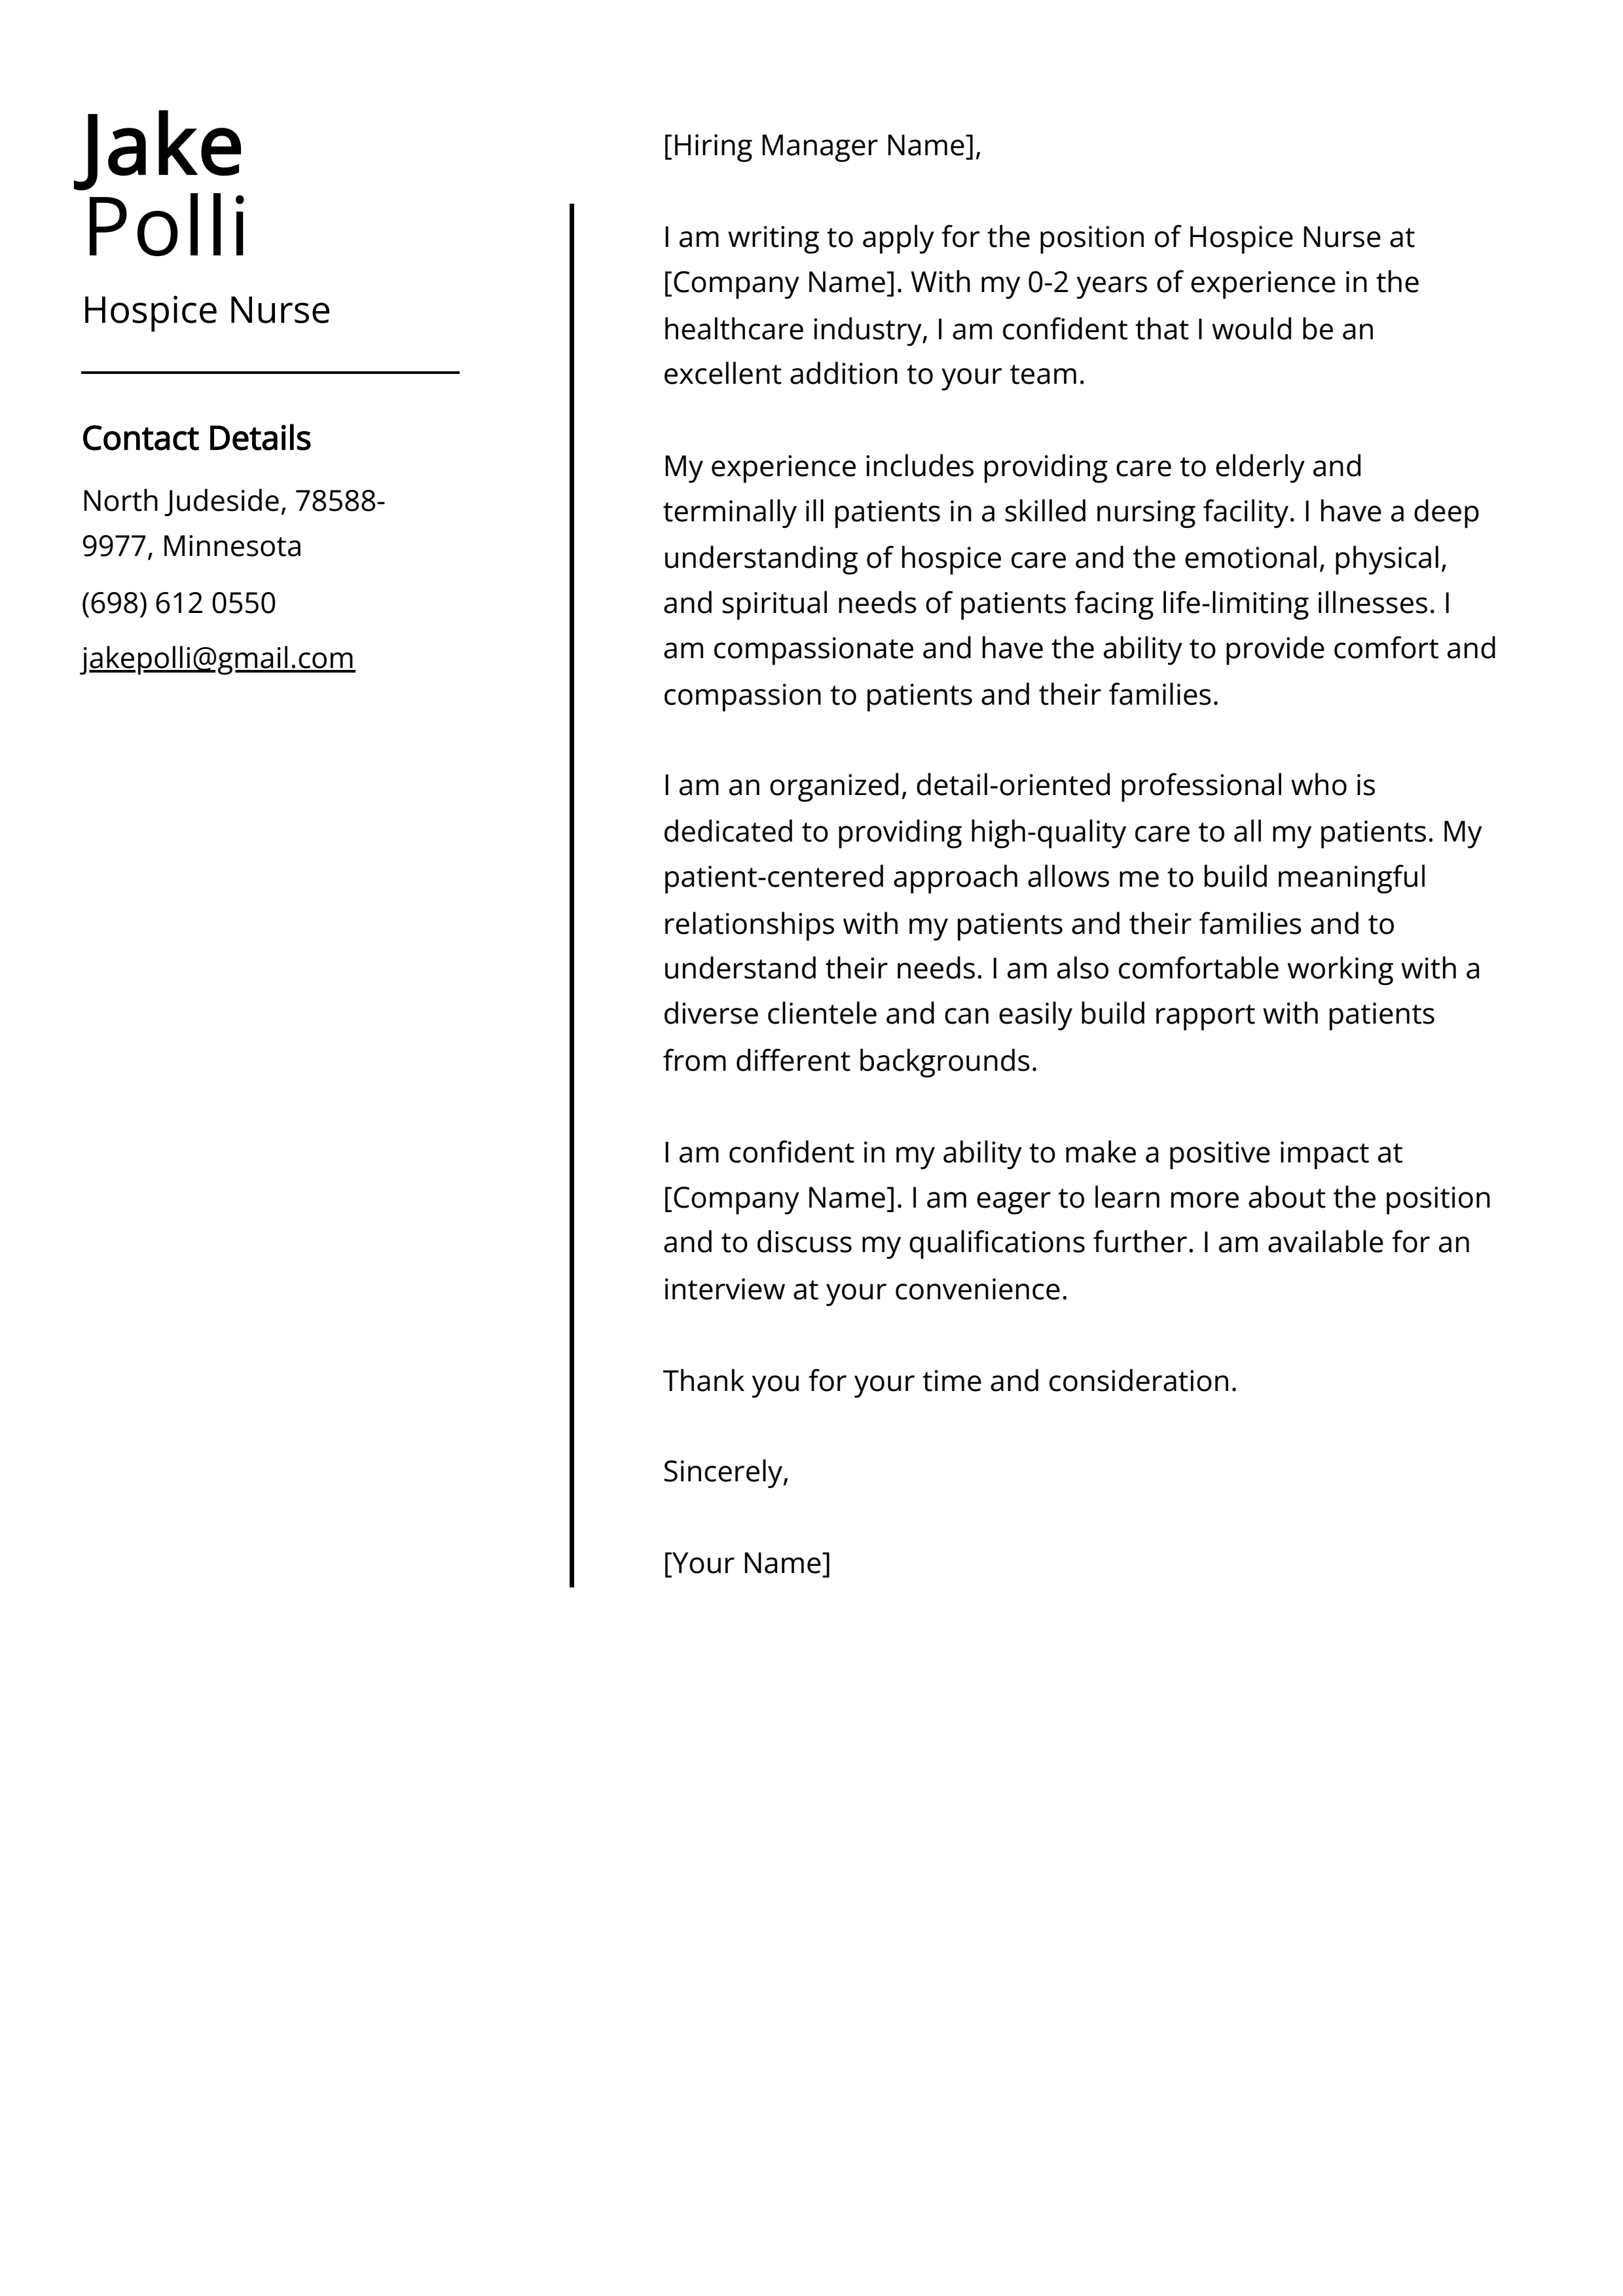 Hospice Nurse Cover Letter Example